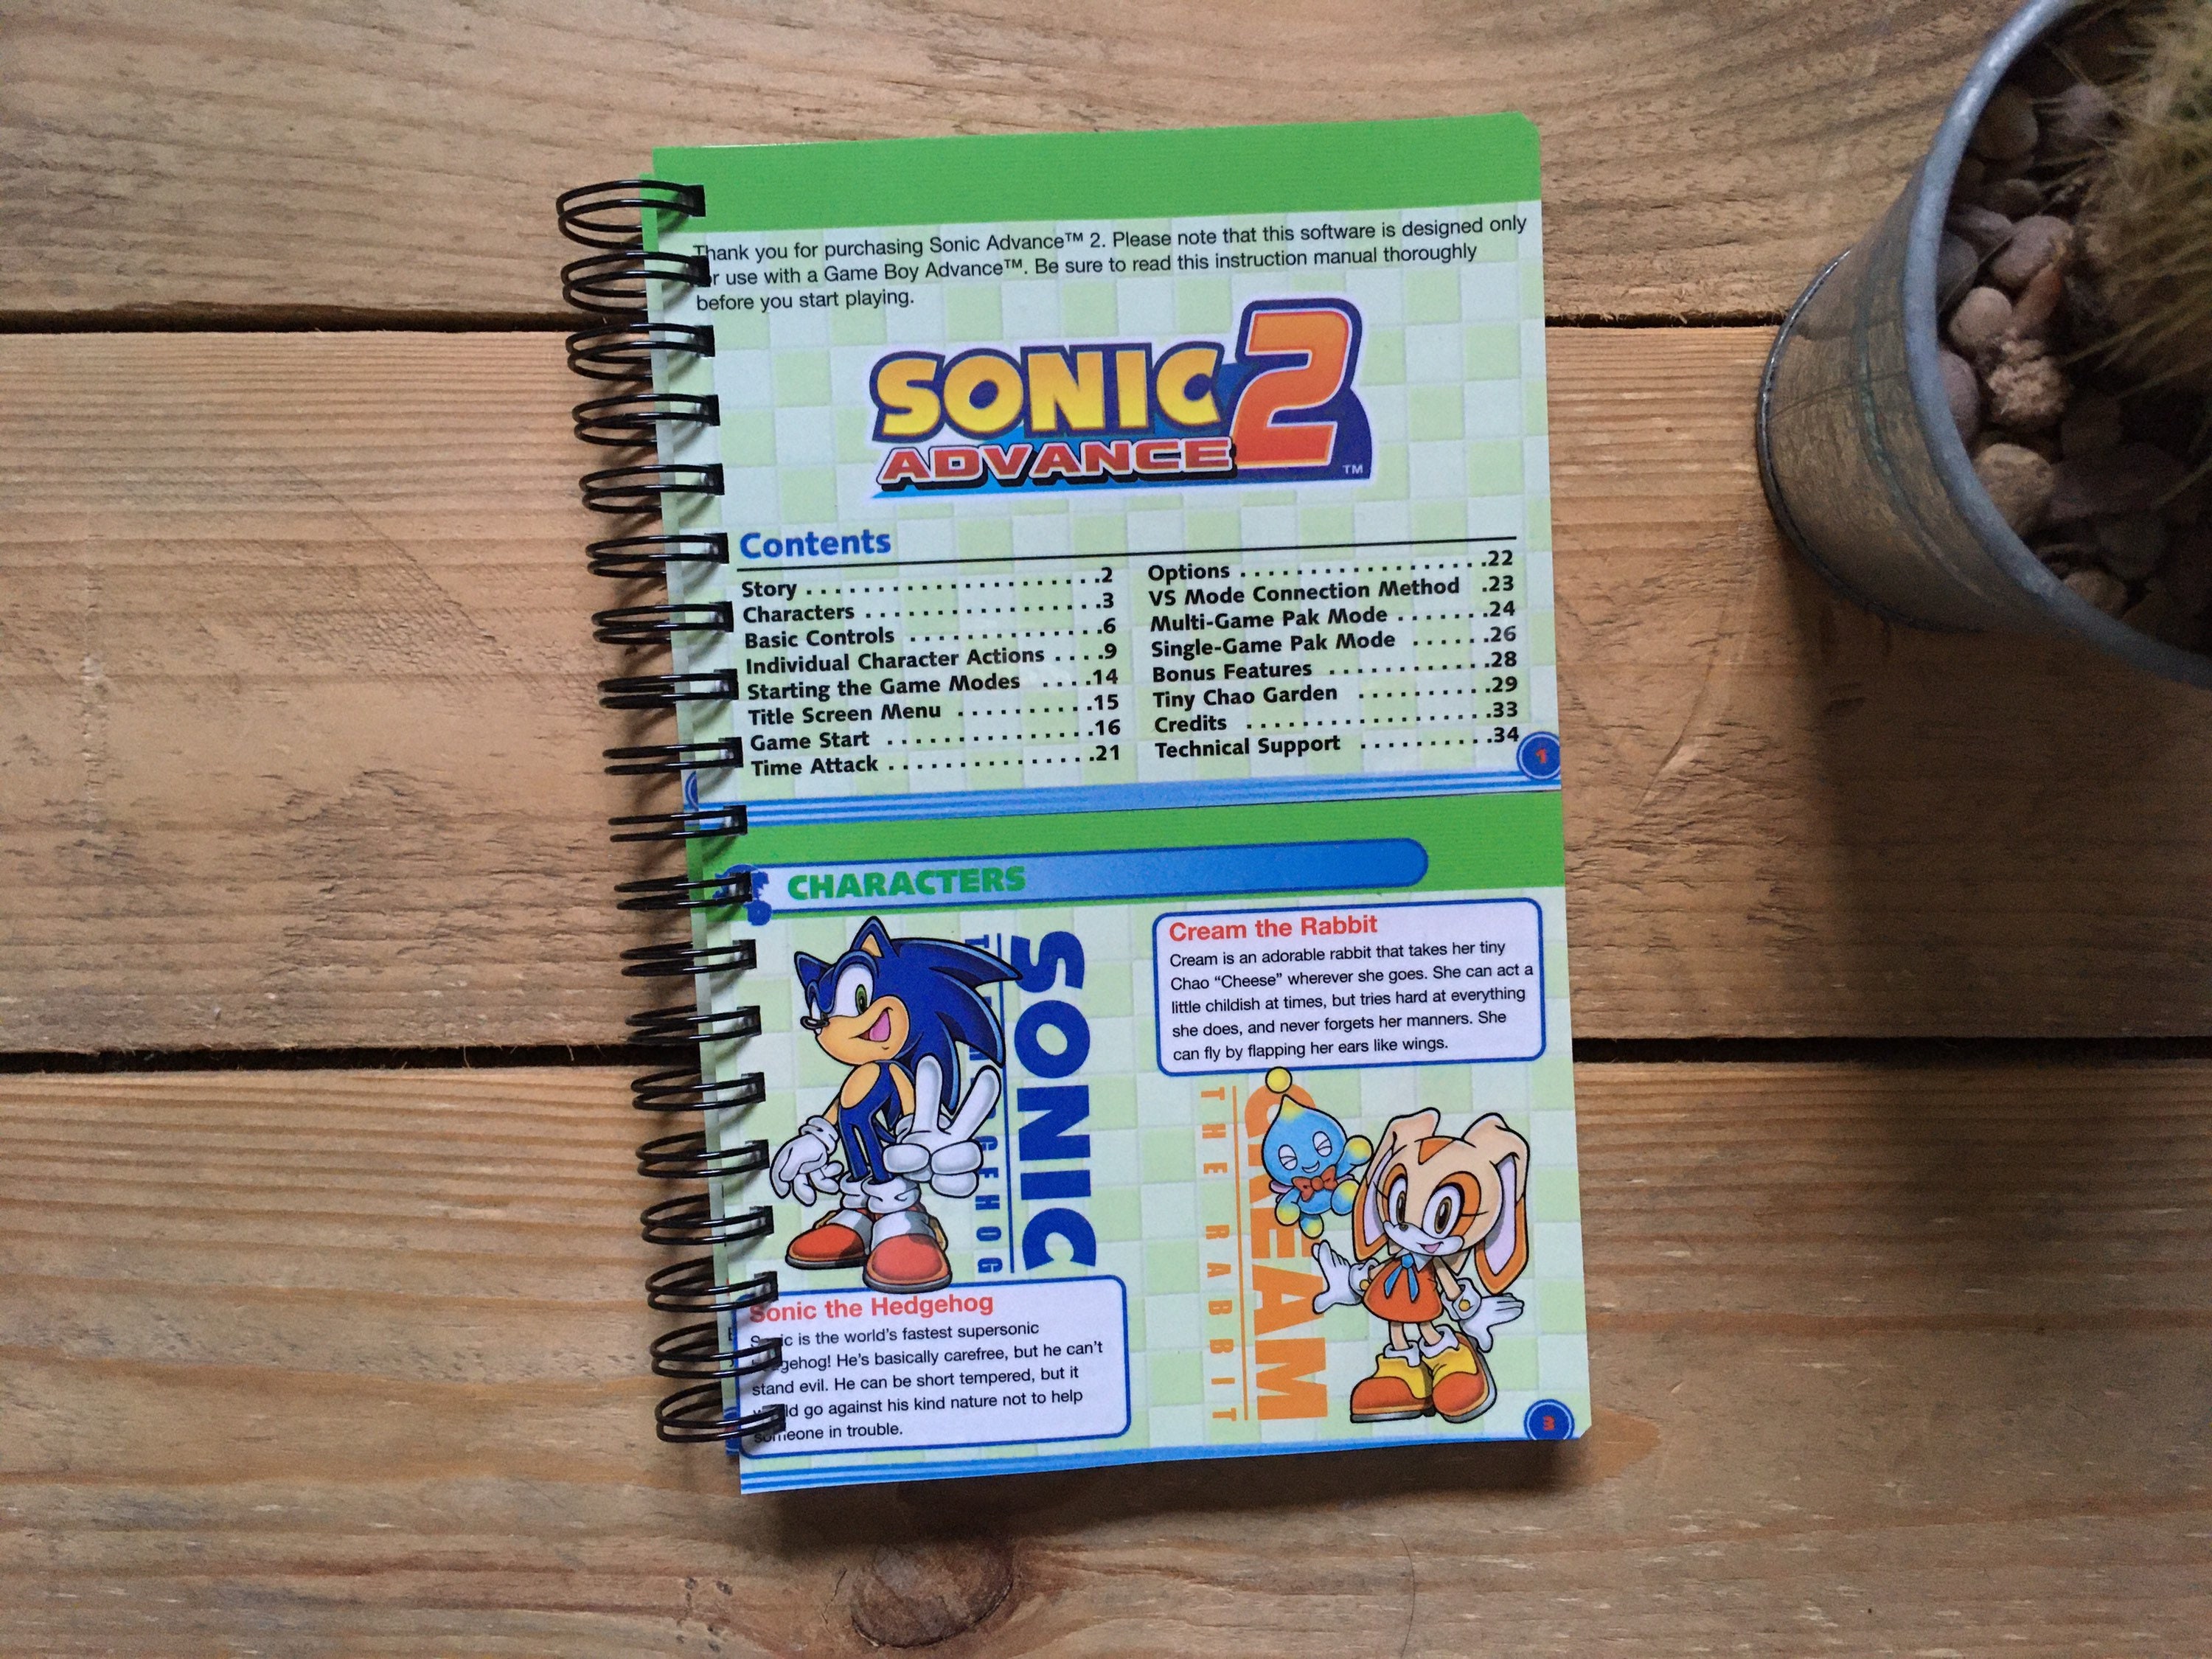 Mecha Sonic Hardcover Journal for Sale by Design-By-Dan